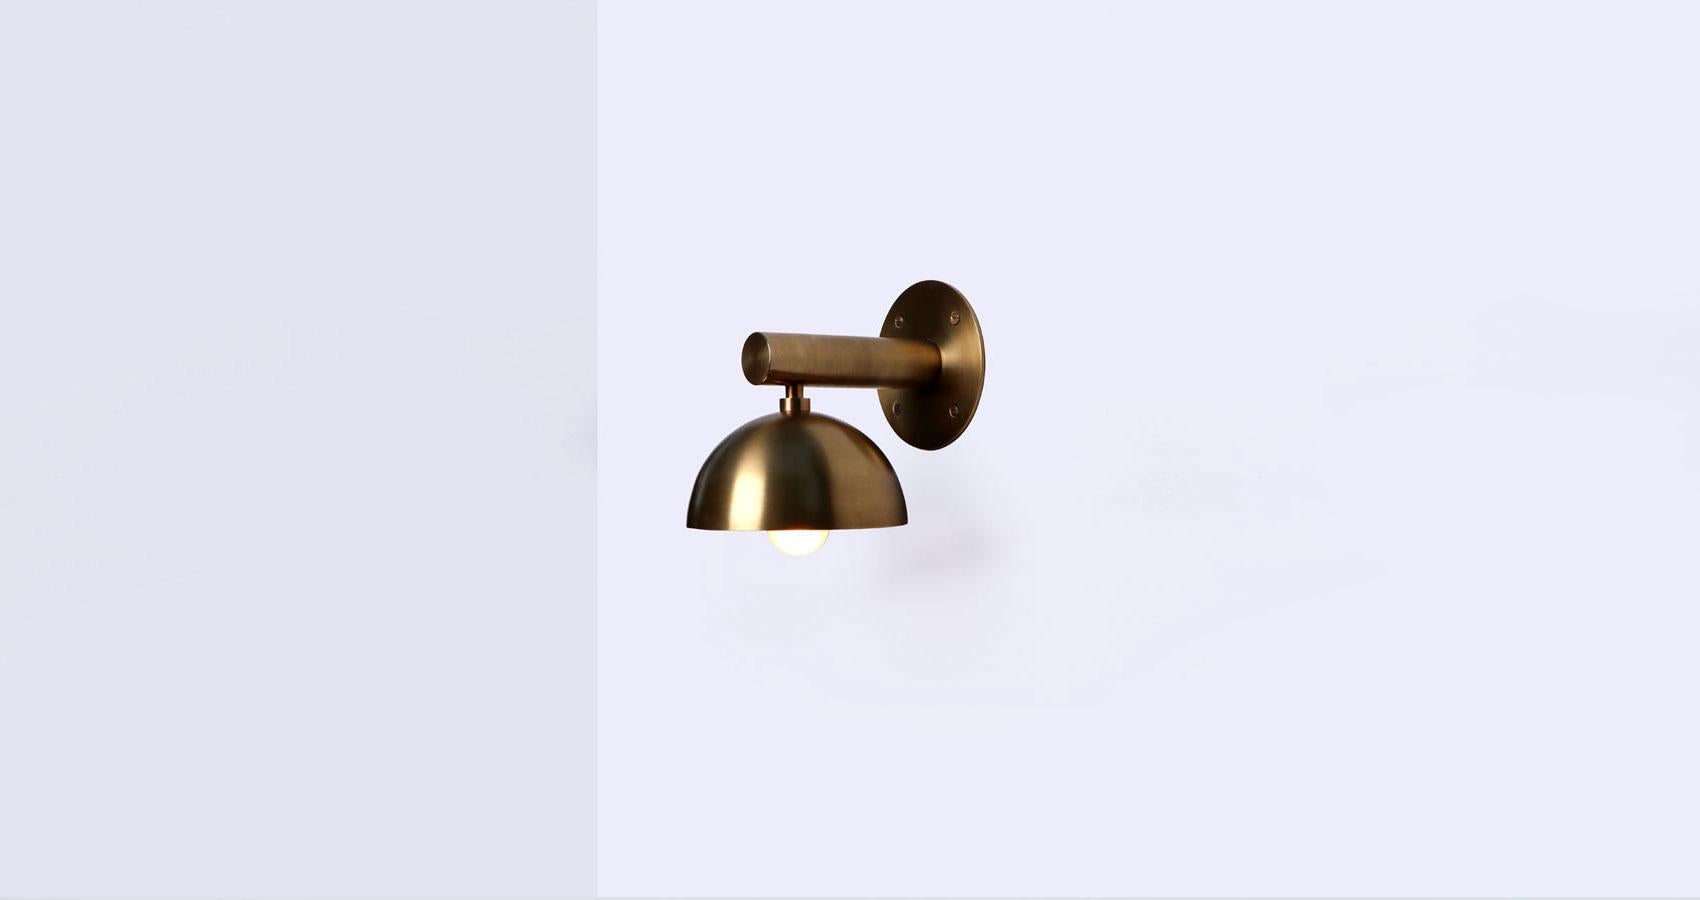 Dot Small Brass Dome Wall Sconce by Lamp Shaper
Dimensions: D 15 x W 19 x H 20.5 cm.
Materials: Brass.

Different finishes available: raw brass, aged brass, burnt brass and brushed brass Please contact us.

All our lamps can be wired according to